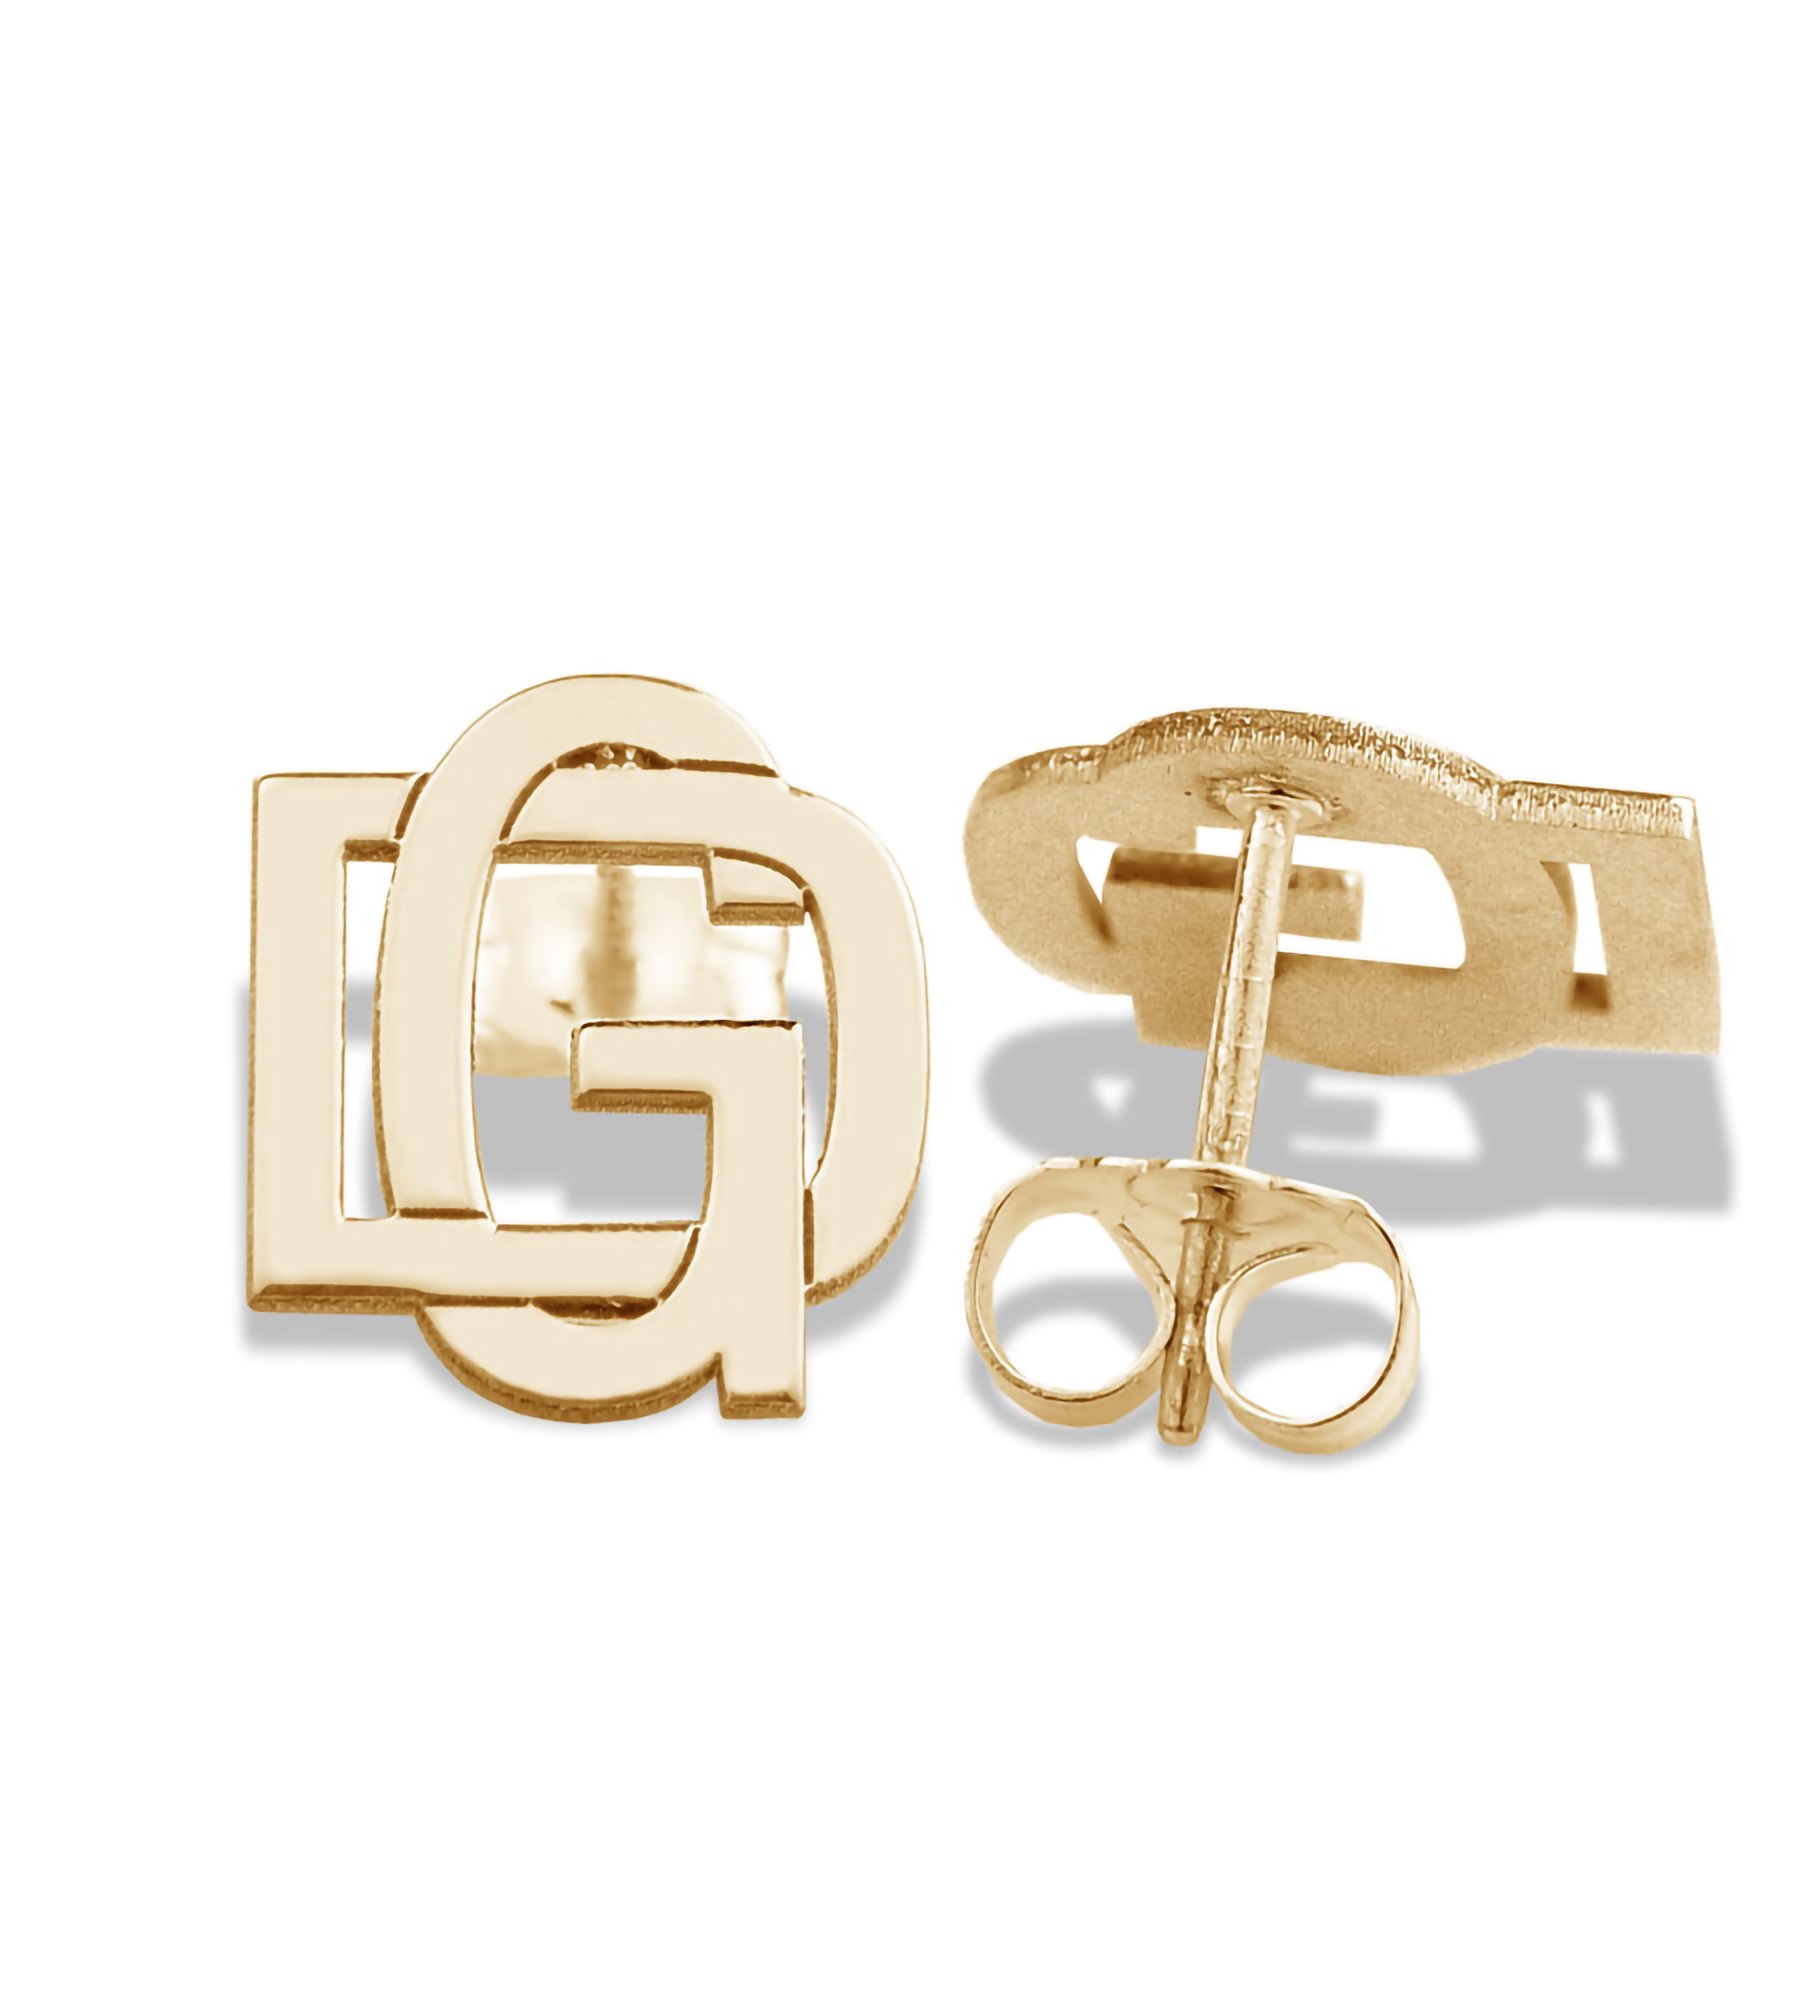 Personalized Overlapping Initial Earrings